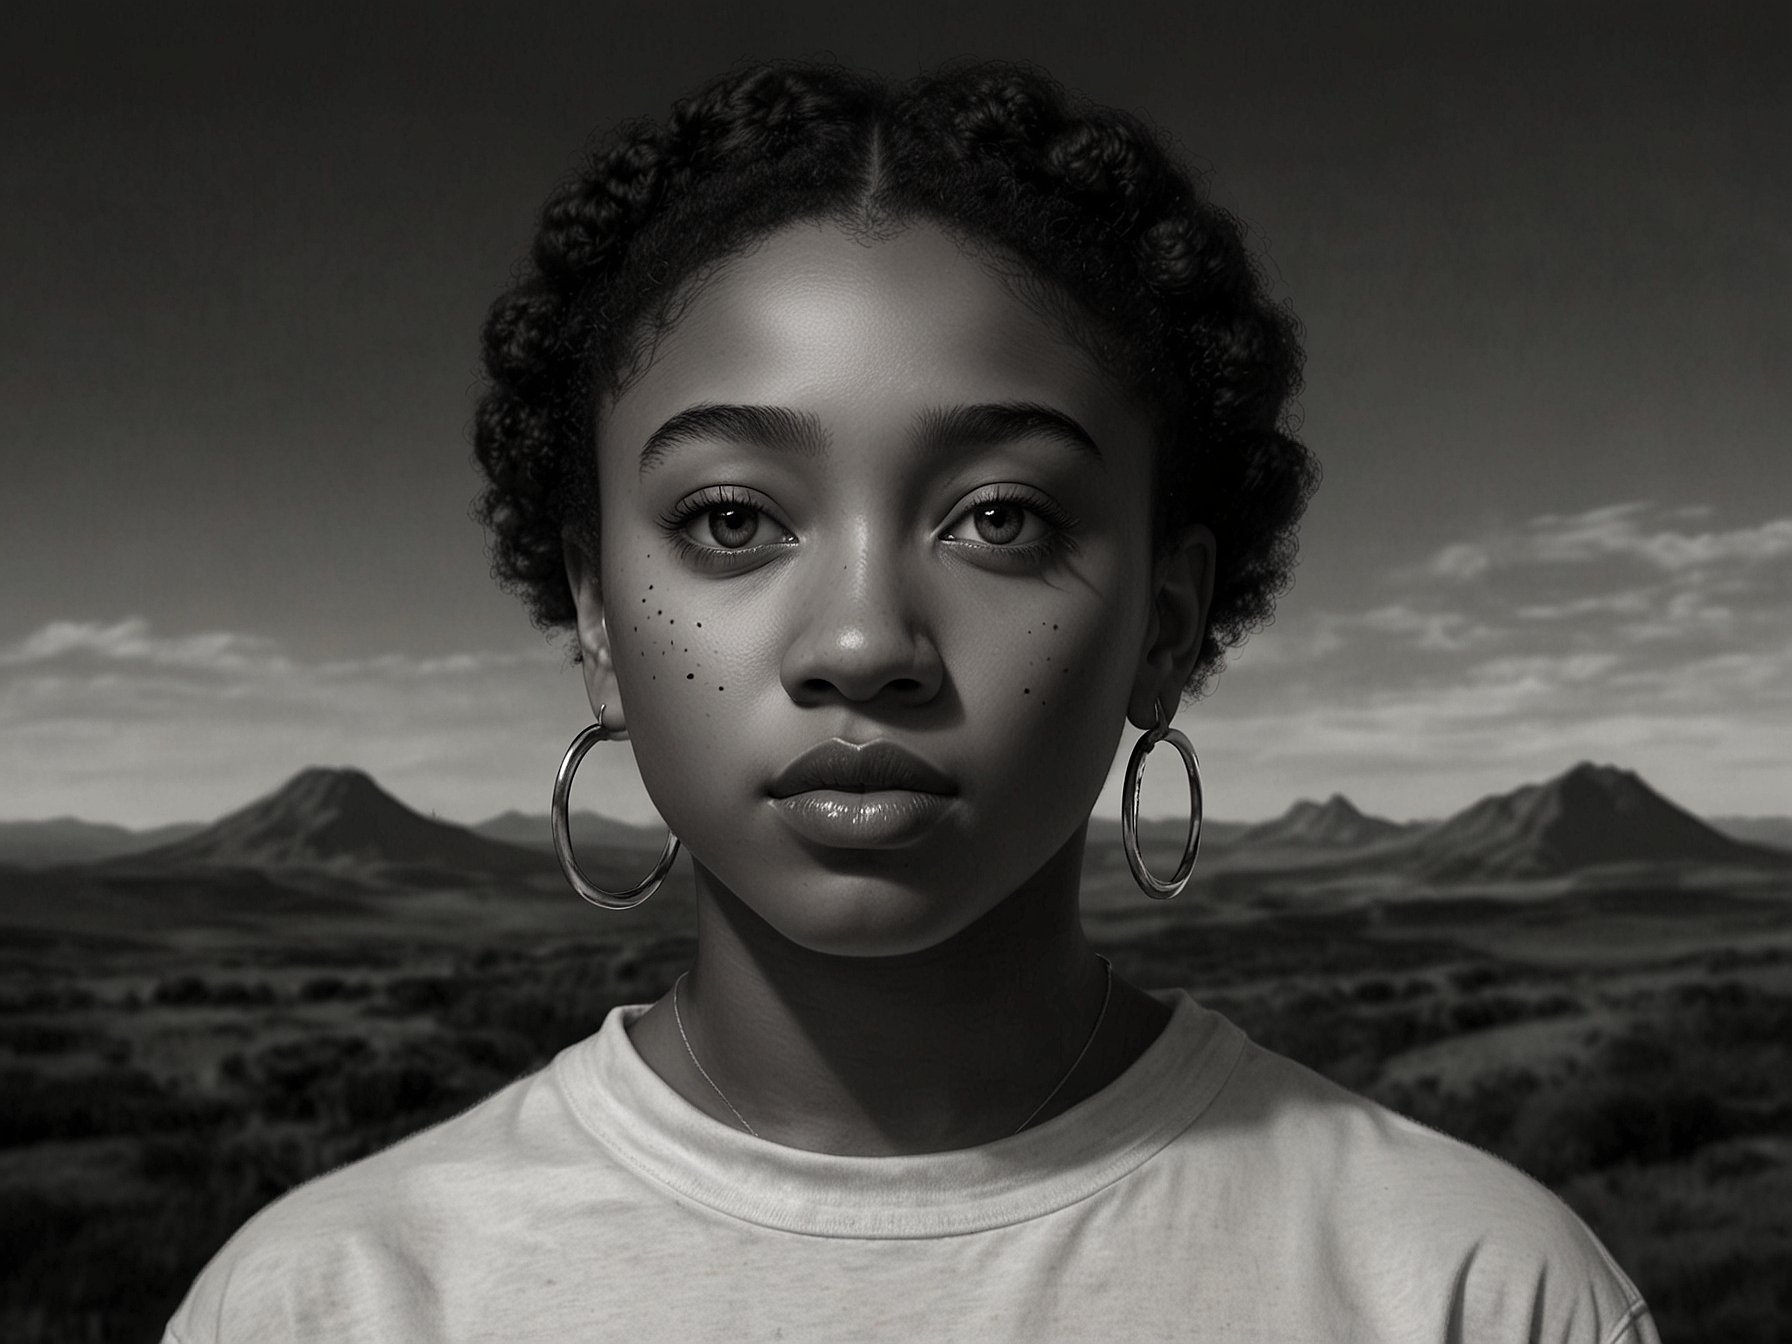 Amandla Stenberg stands in a visually striking setting, embodying empowerment and defiance as she addresses the absurdity of racist comments in her poignant music video.